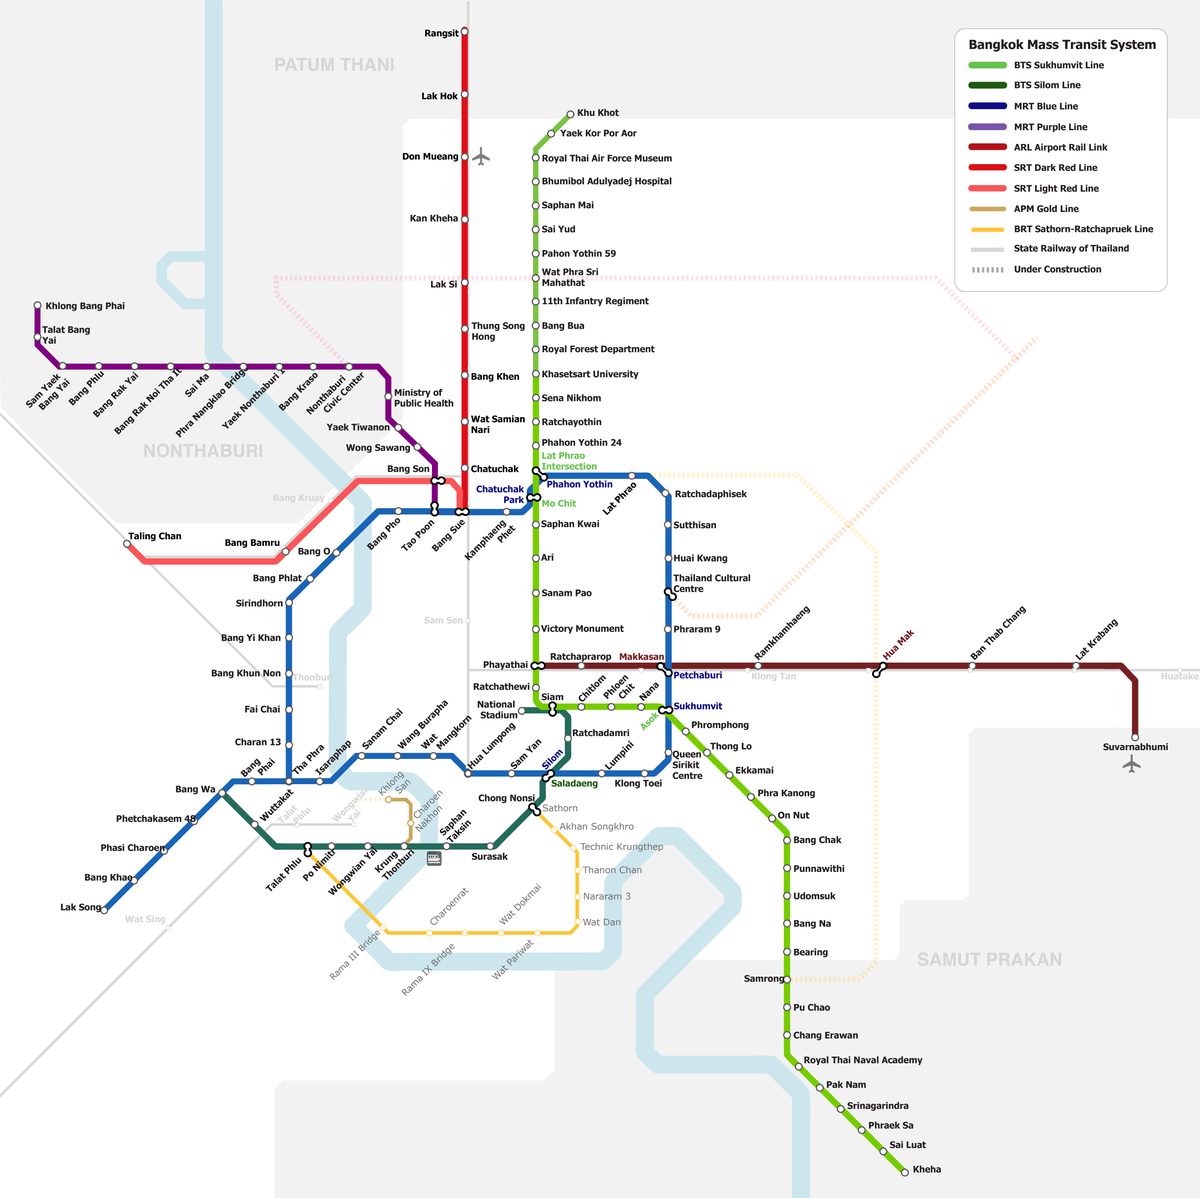 map of public transport system map